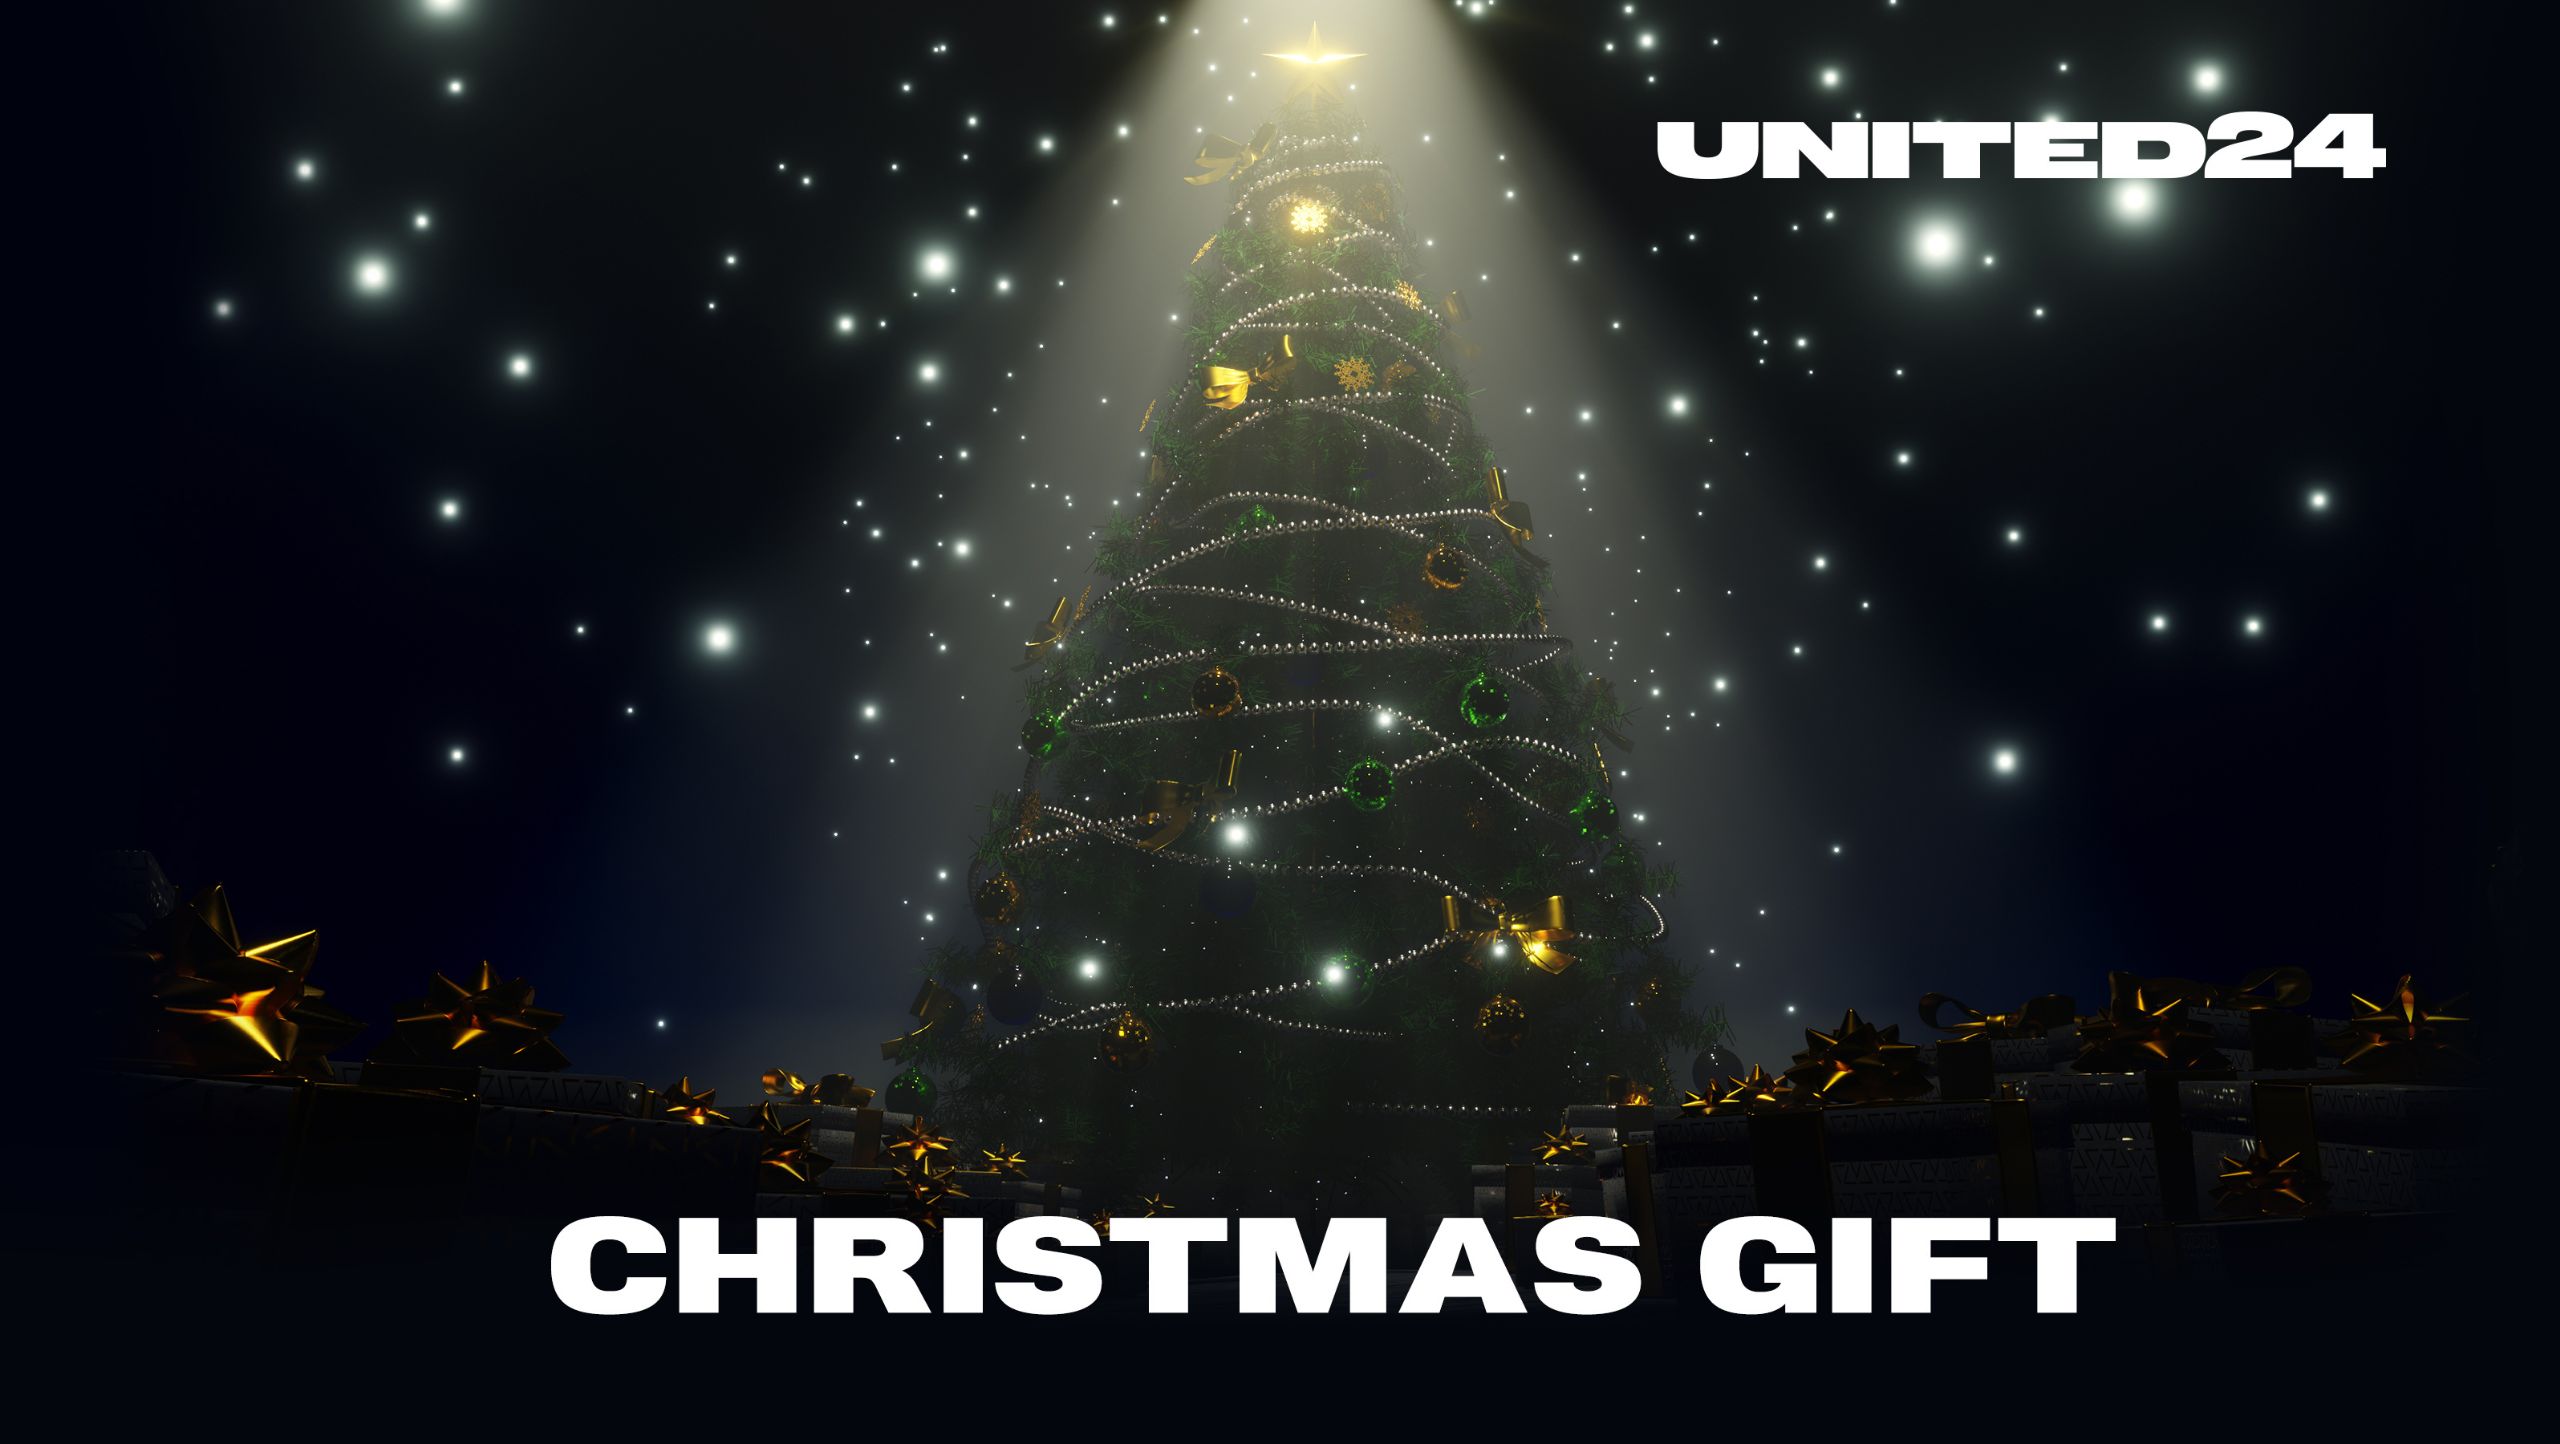 Wish Your Close Ones a Very Merry Christmas and a Happy New Year, by Making a Donation via UNITED24 on Their Behalf